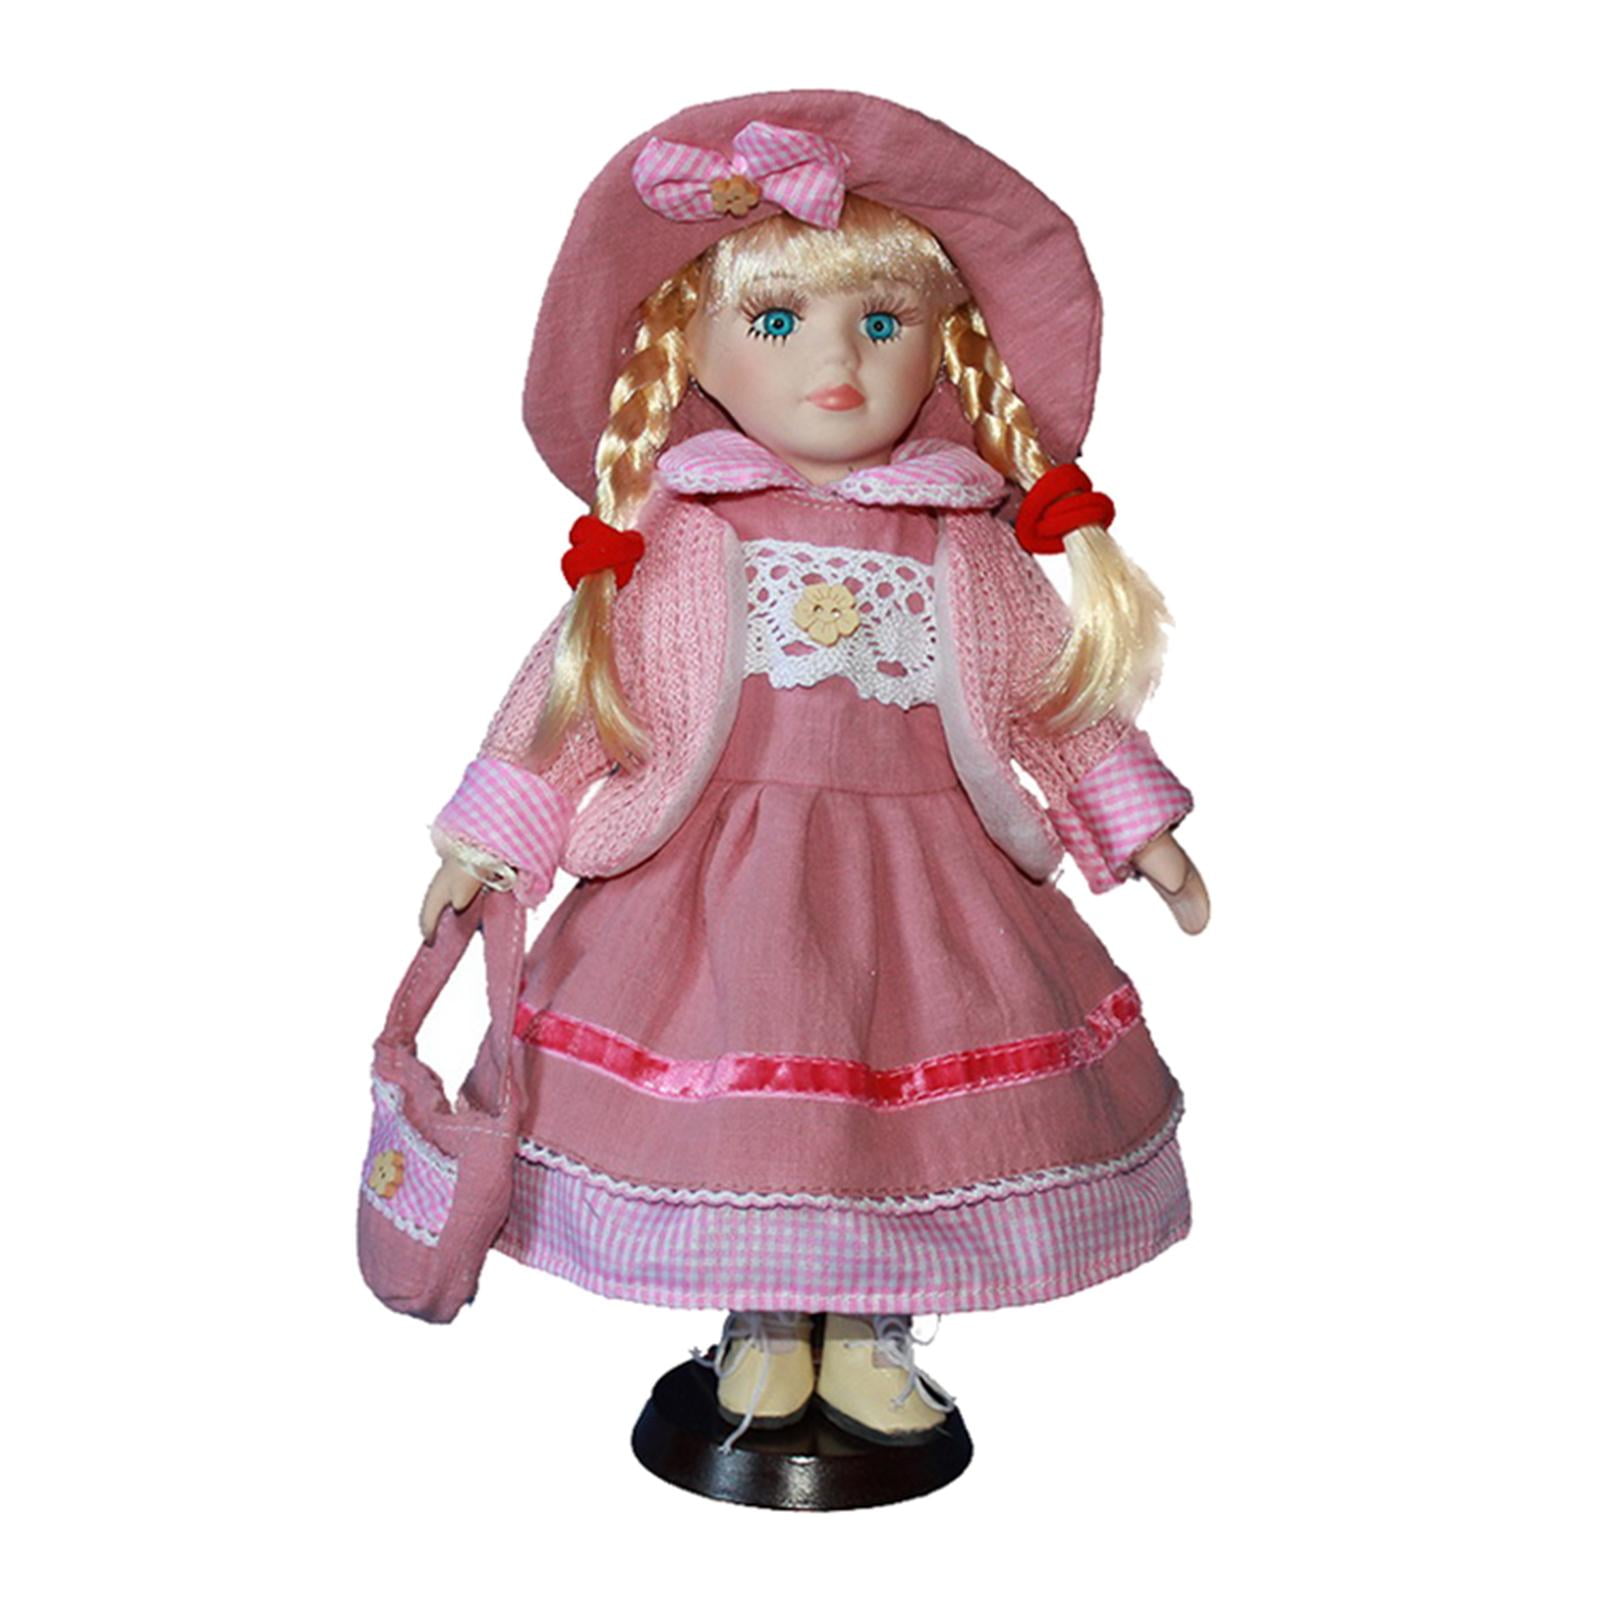 Lovely Porcelain Doll Girl Figures with Pink Clothes Hat Set Gift